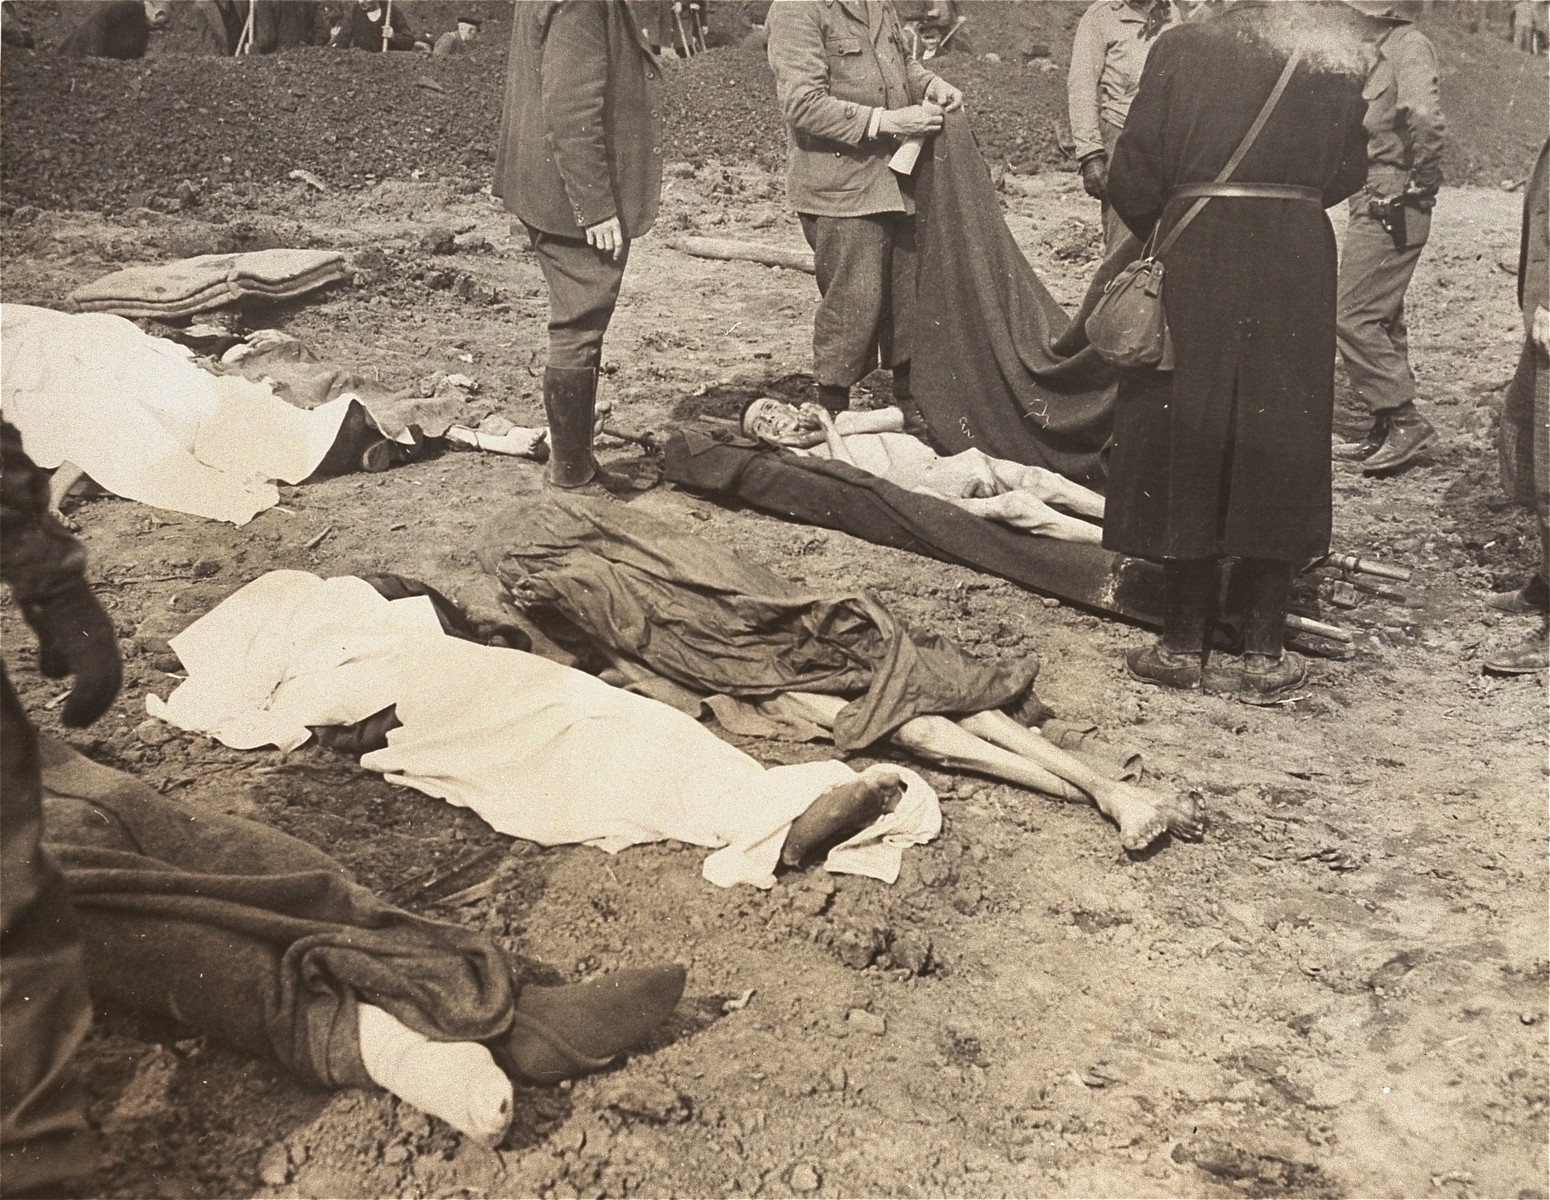 German civilians from the nearby town of Nordhausen prepare the bodies of prisoners found at the Nordhausen concentration camp for burial.